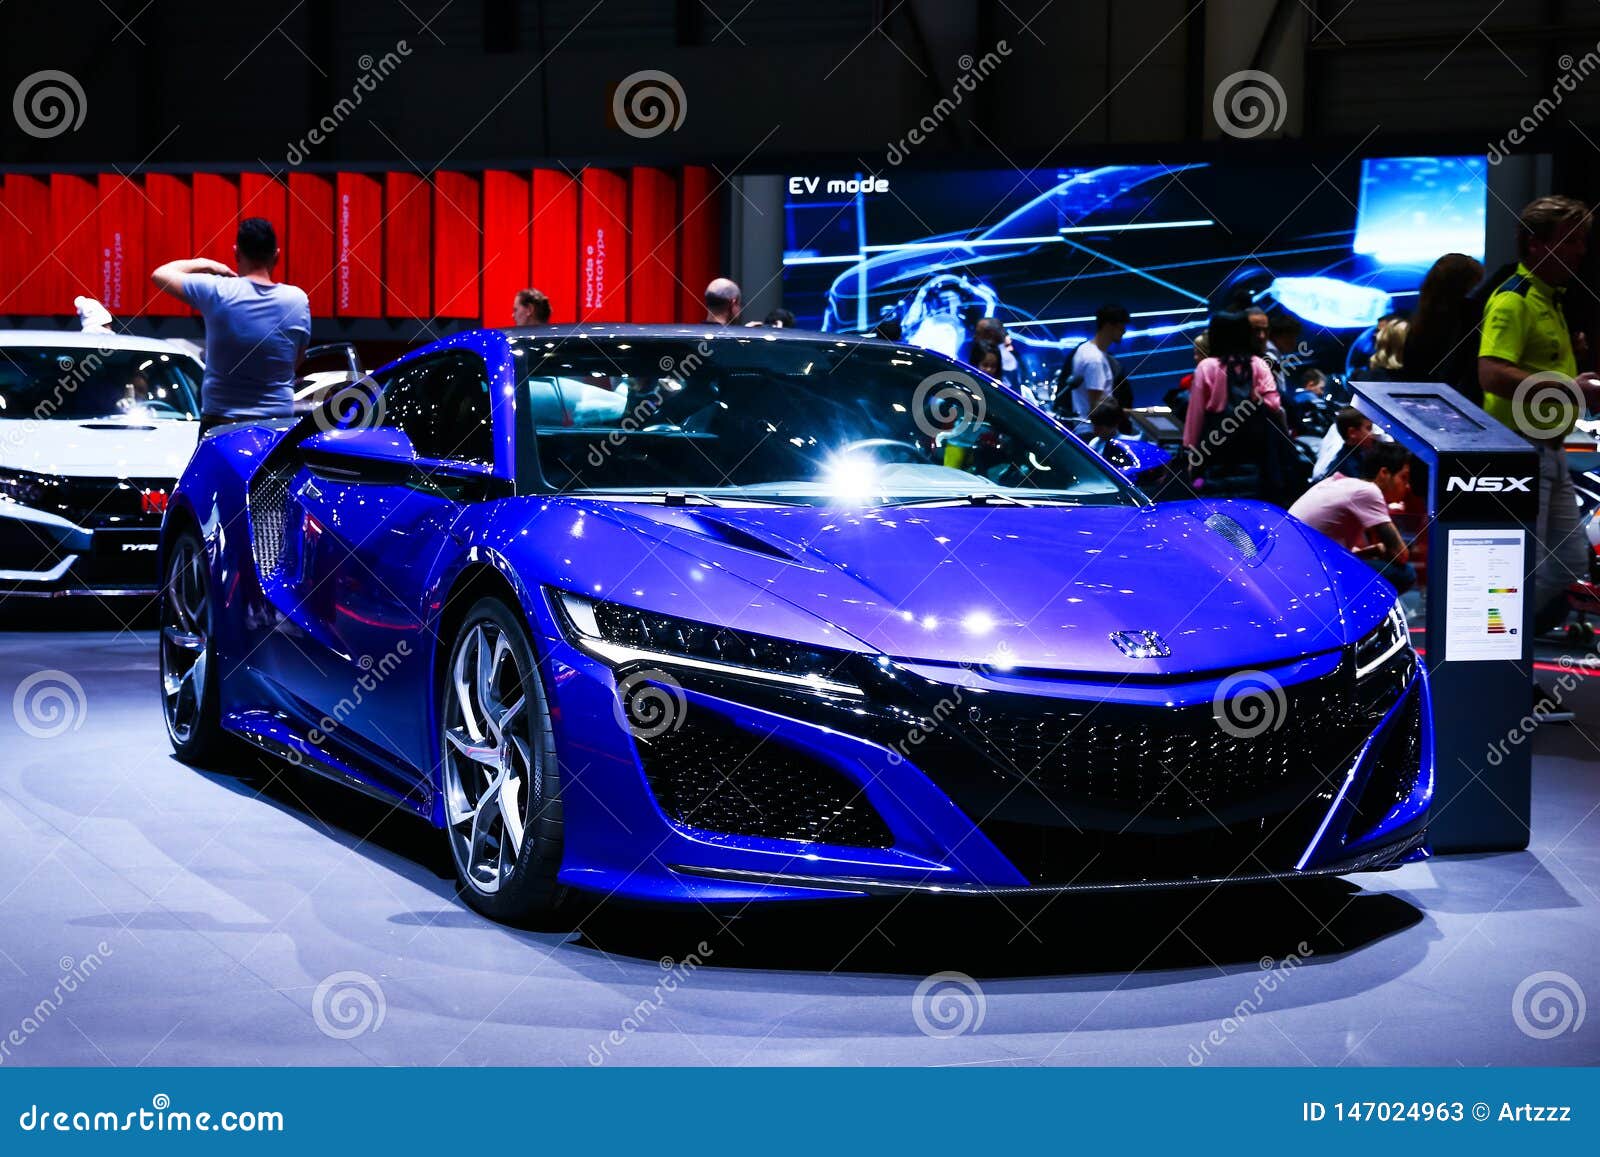 Honda NSX Expected Price  1 Cr 2023 Launch Date Bookings in India